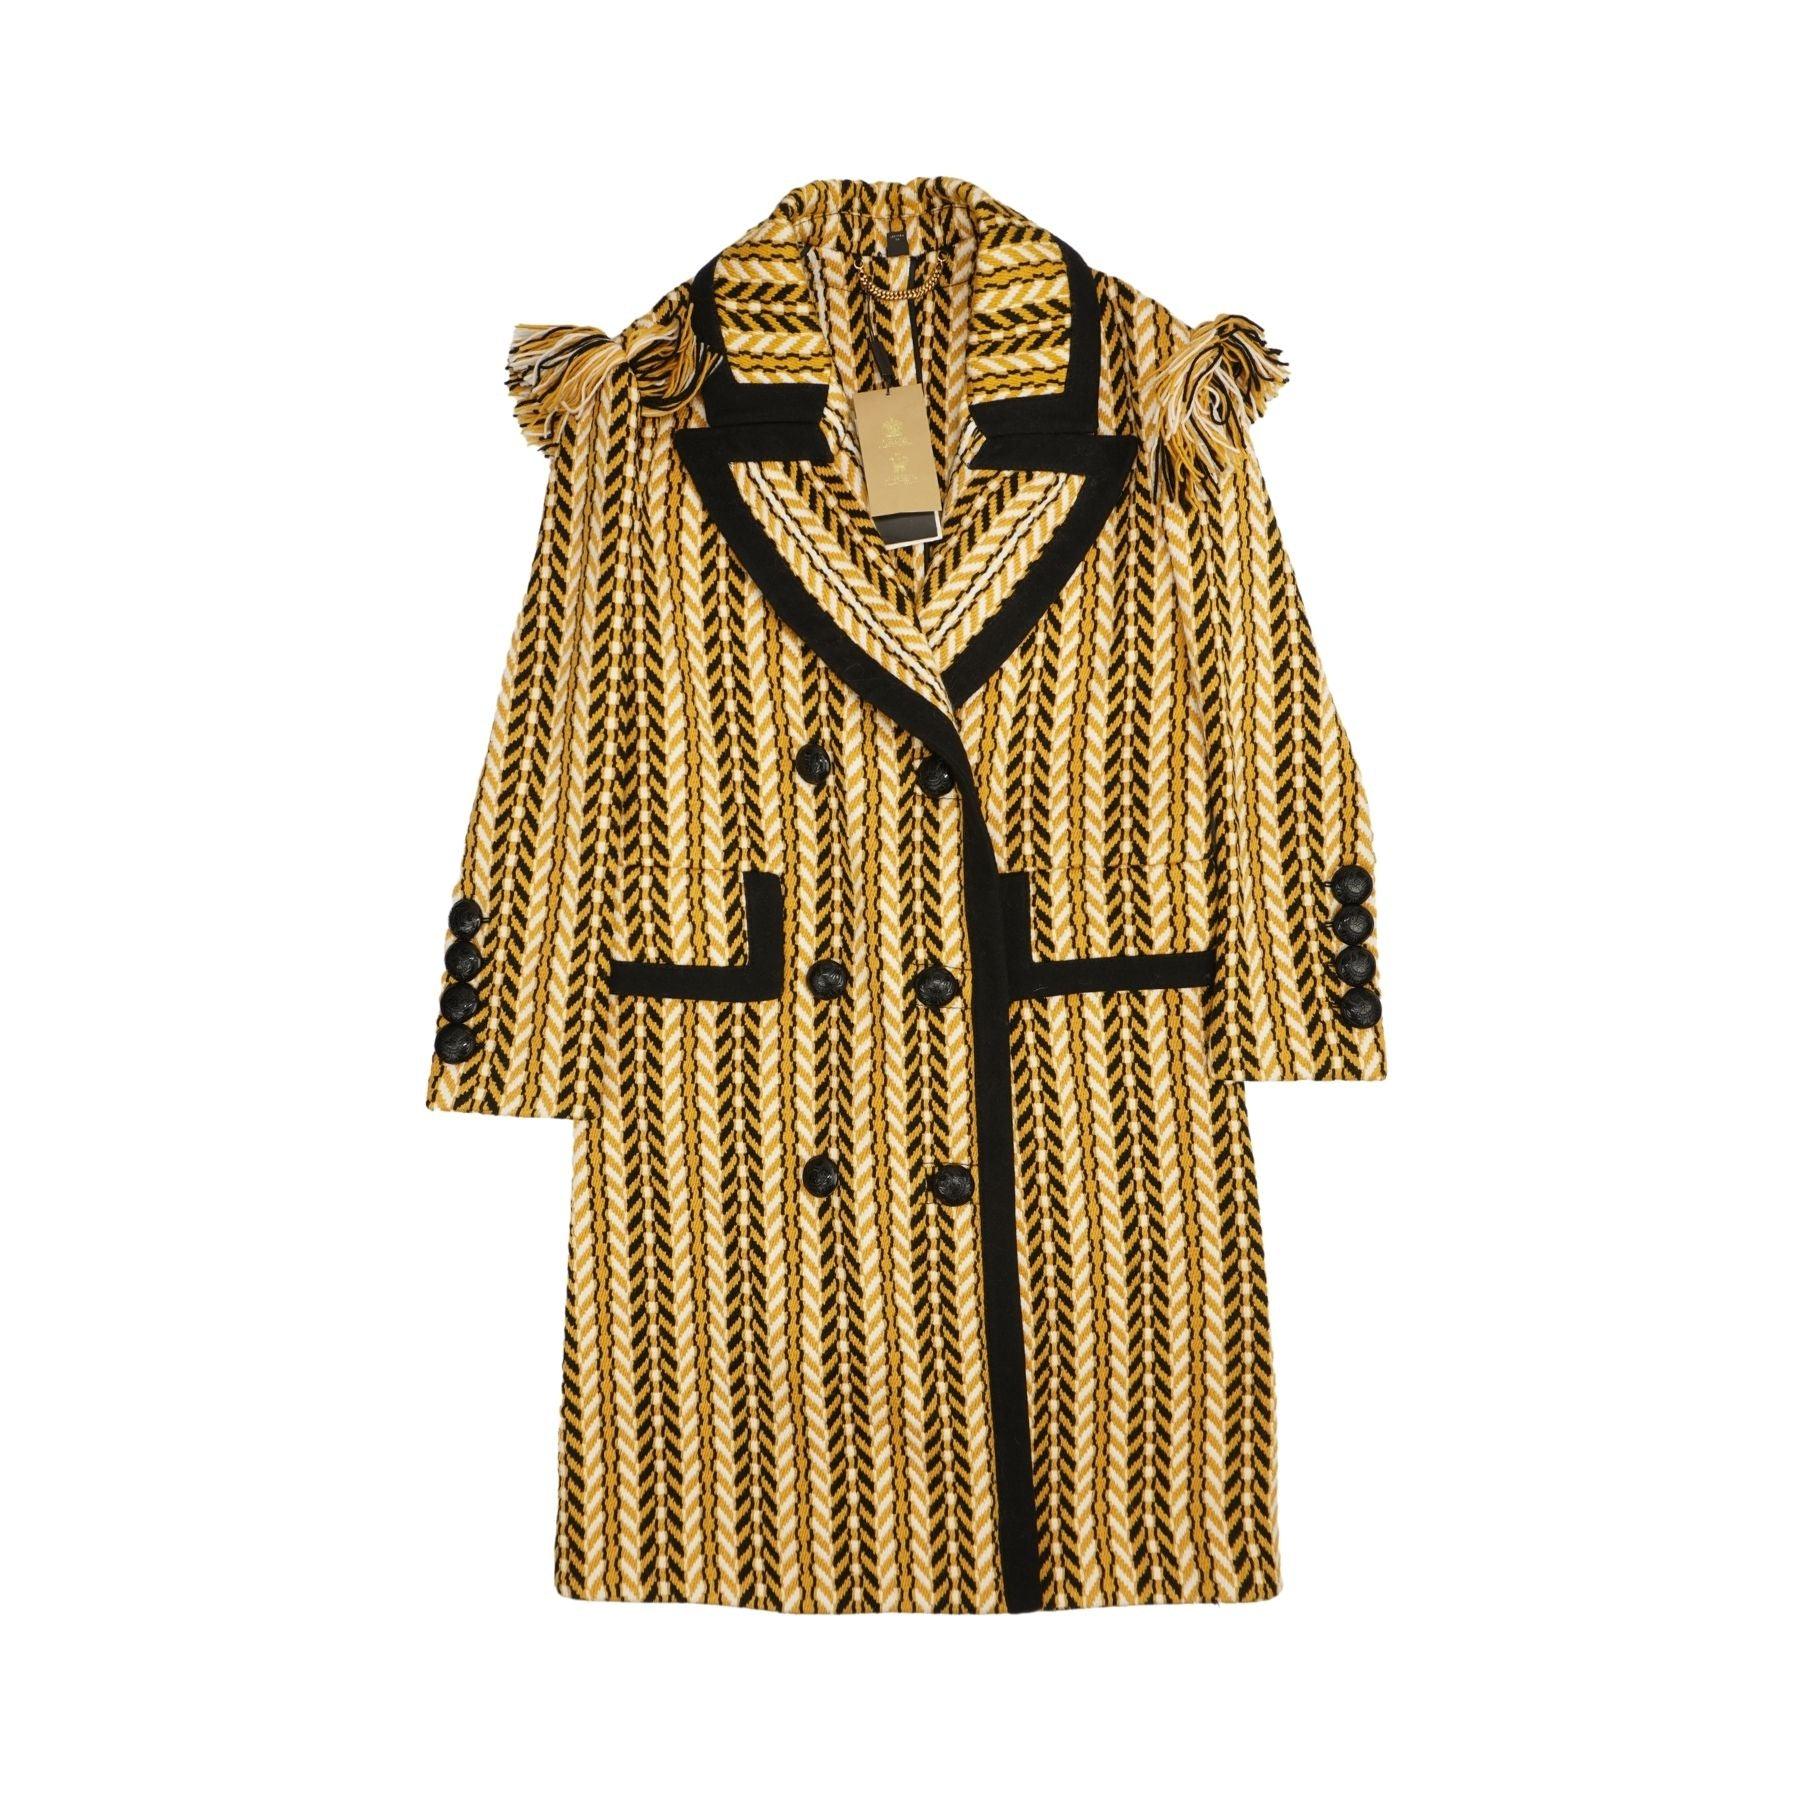 Burberry Wool Jacket - Women's 6 - Fashionably Yours